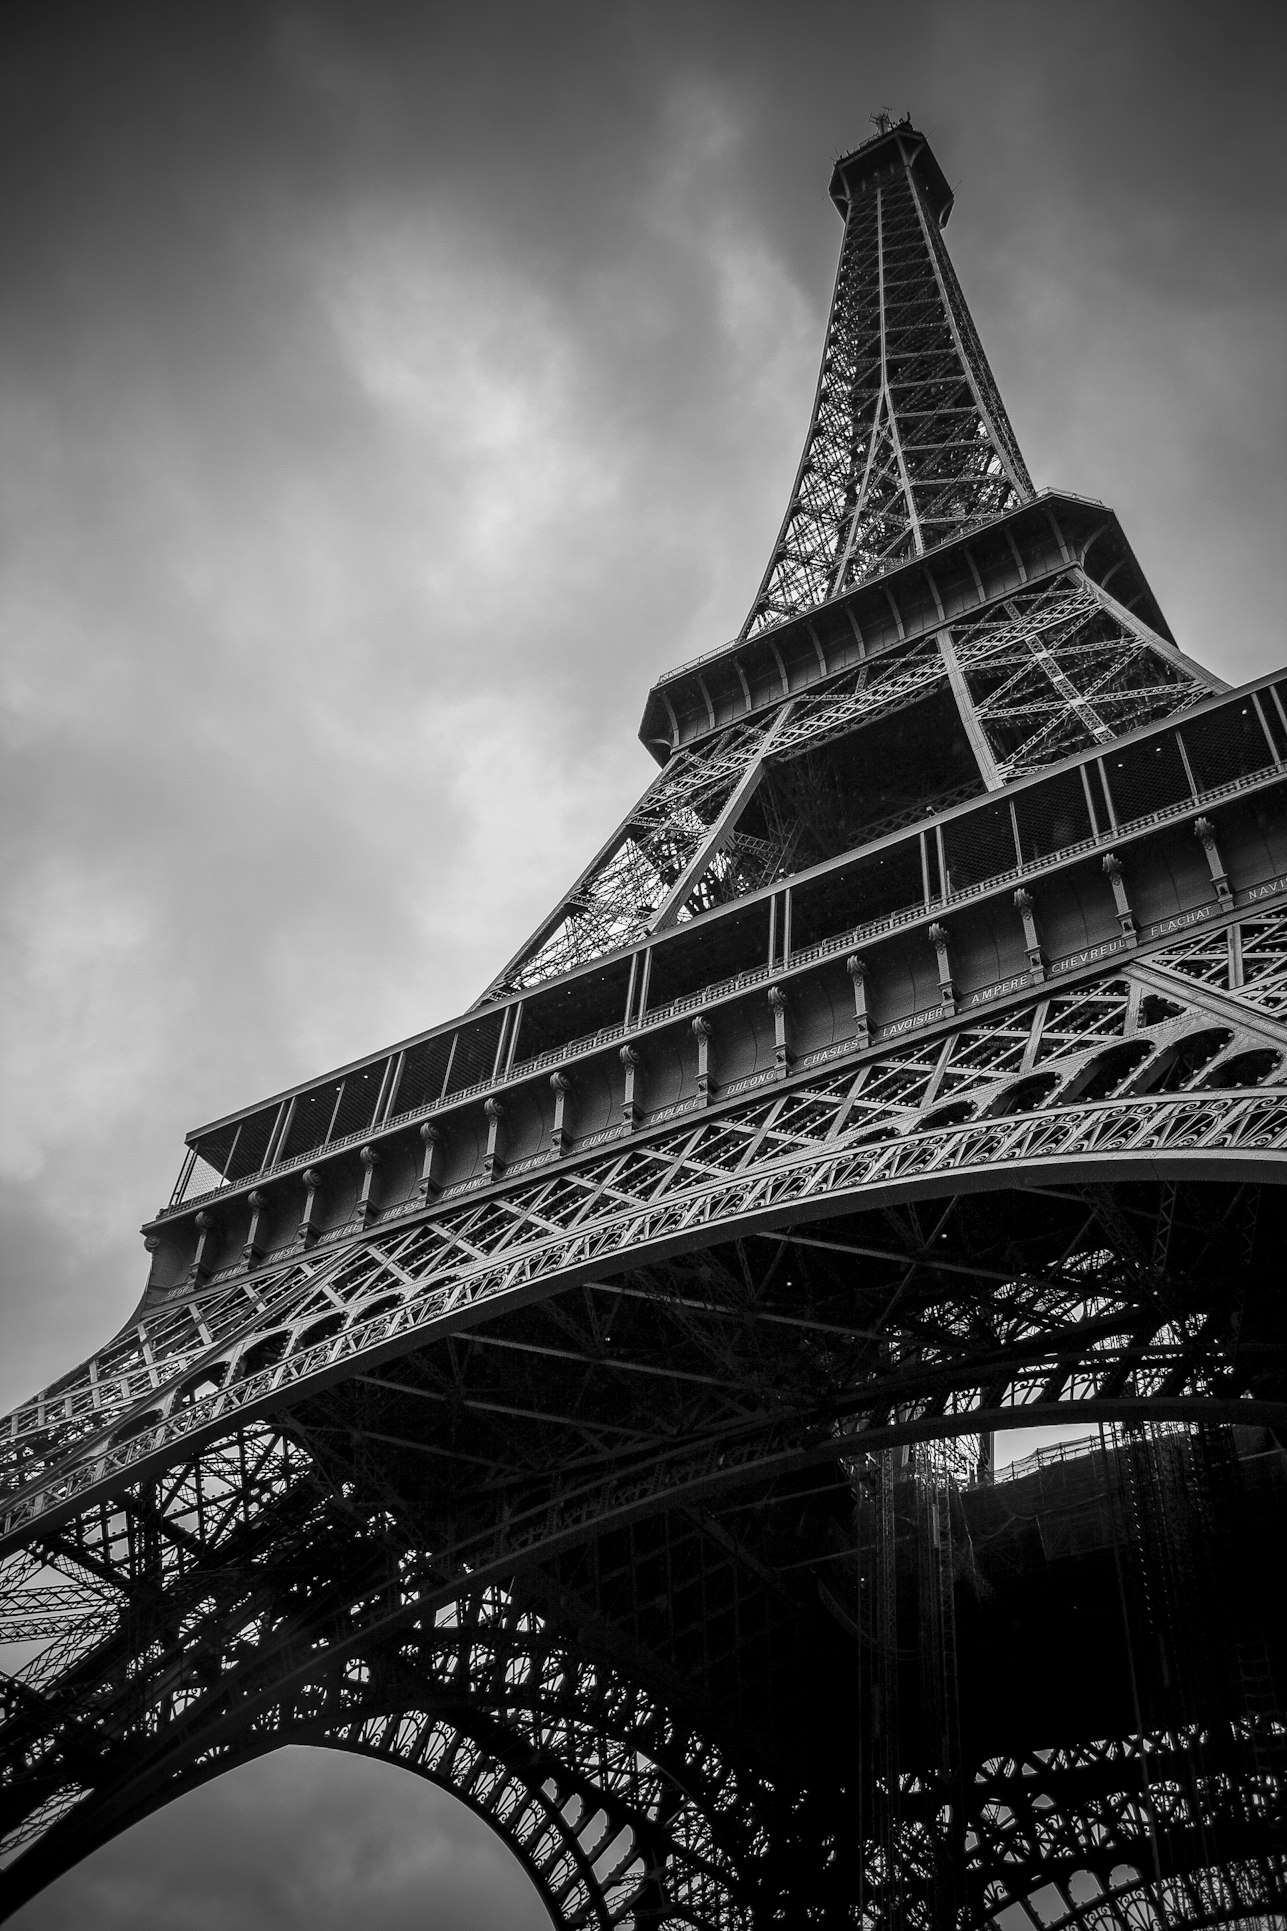 Stock Photo of the eiffel tower